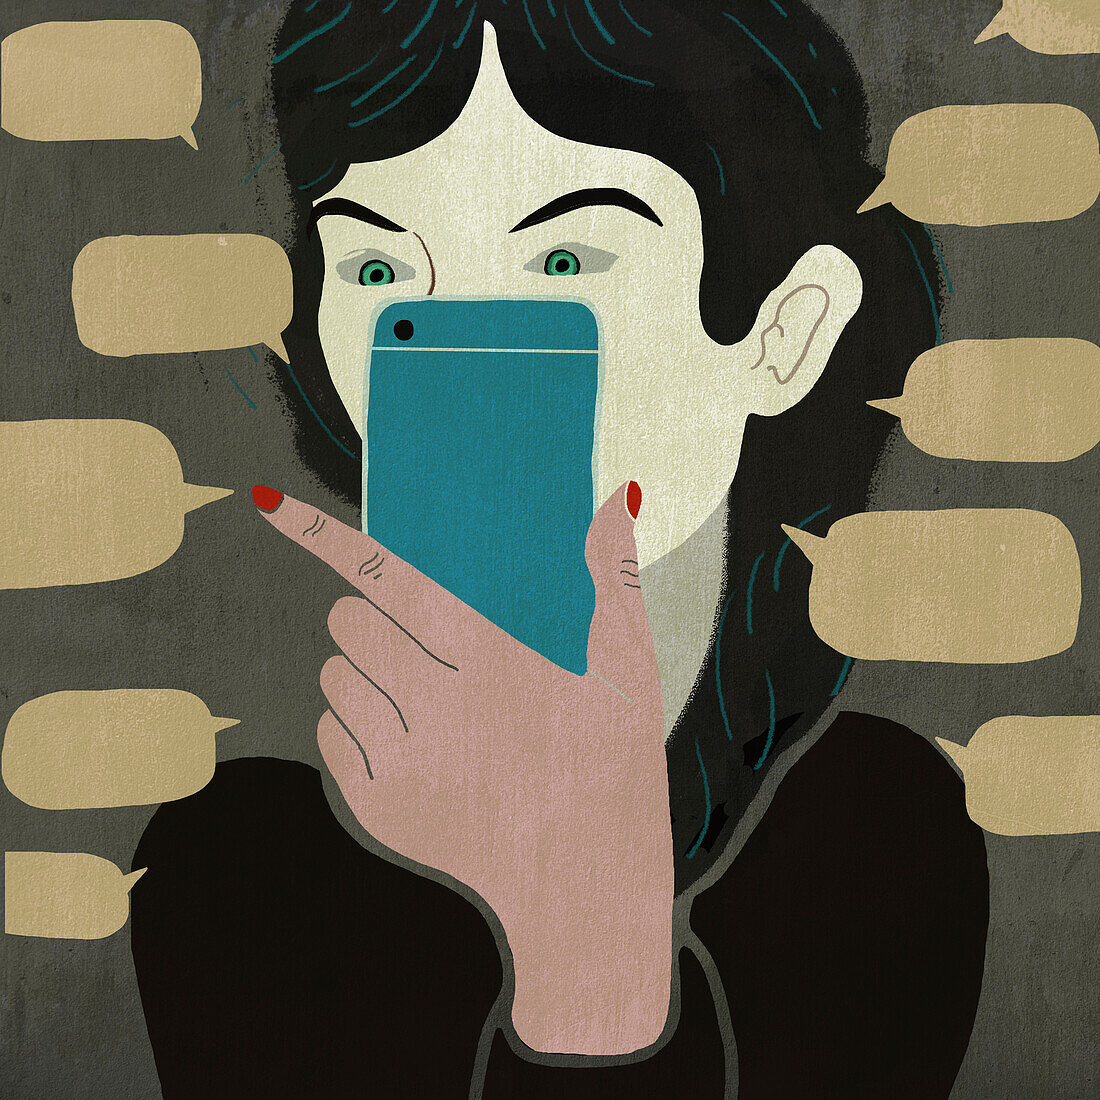 Woman using a mobile phone, illustration